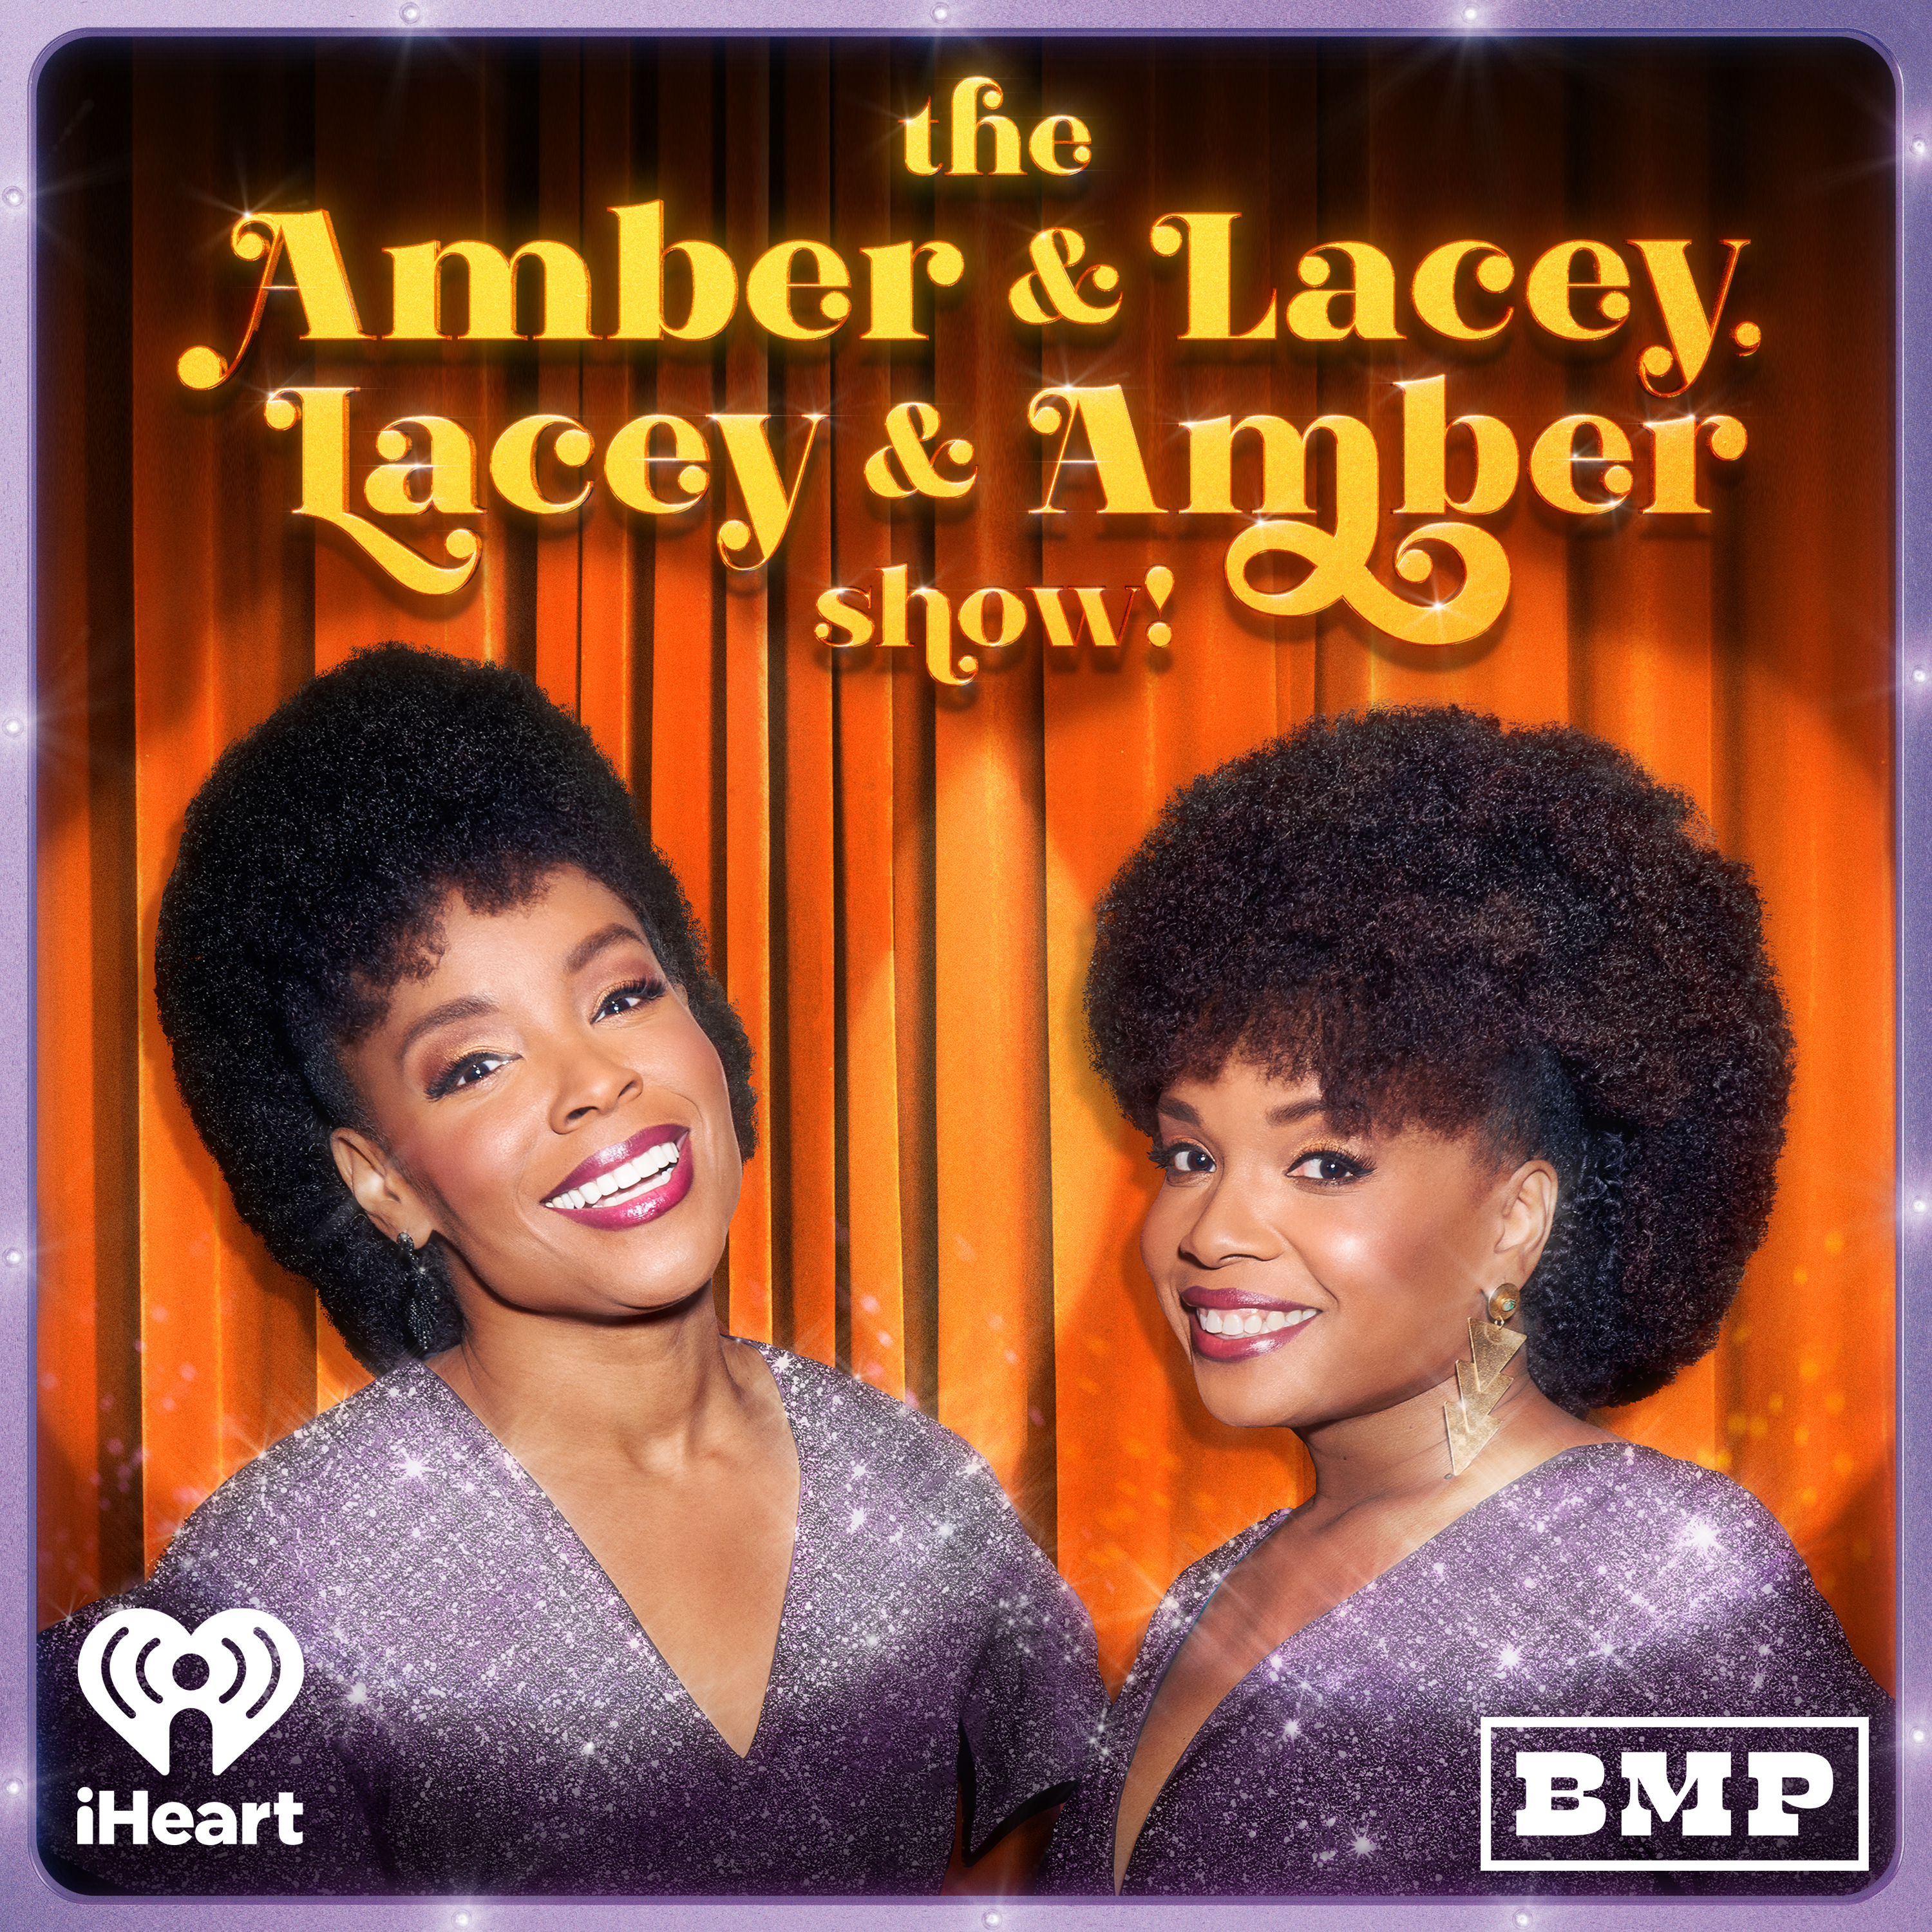 5th Graders & Senior Citizens: This Week's Unbelievable Story From Amber Ruffin & Lacey Lamar